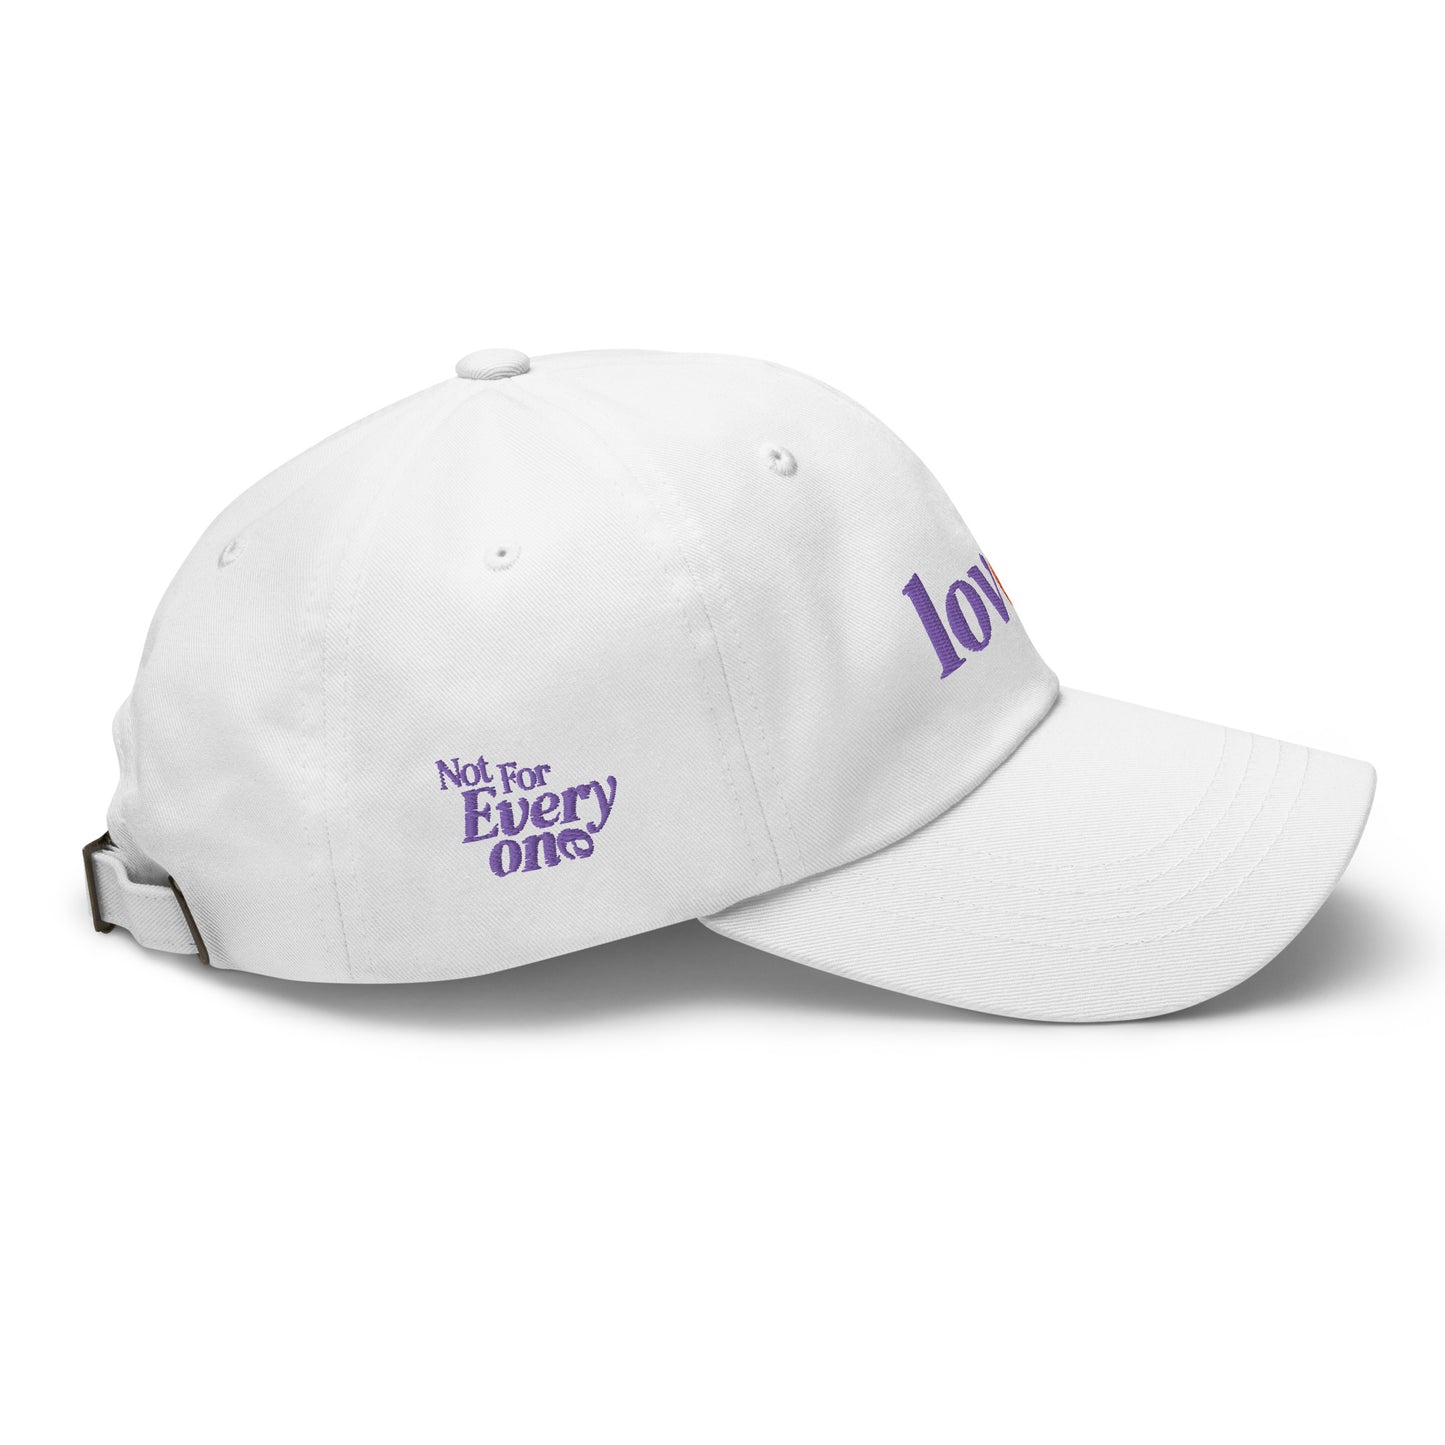 Twisted Lover Cap (Color)